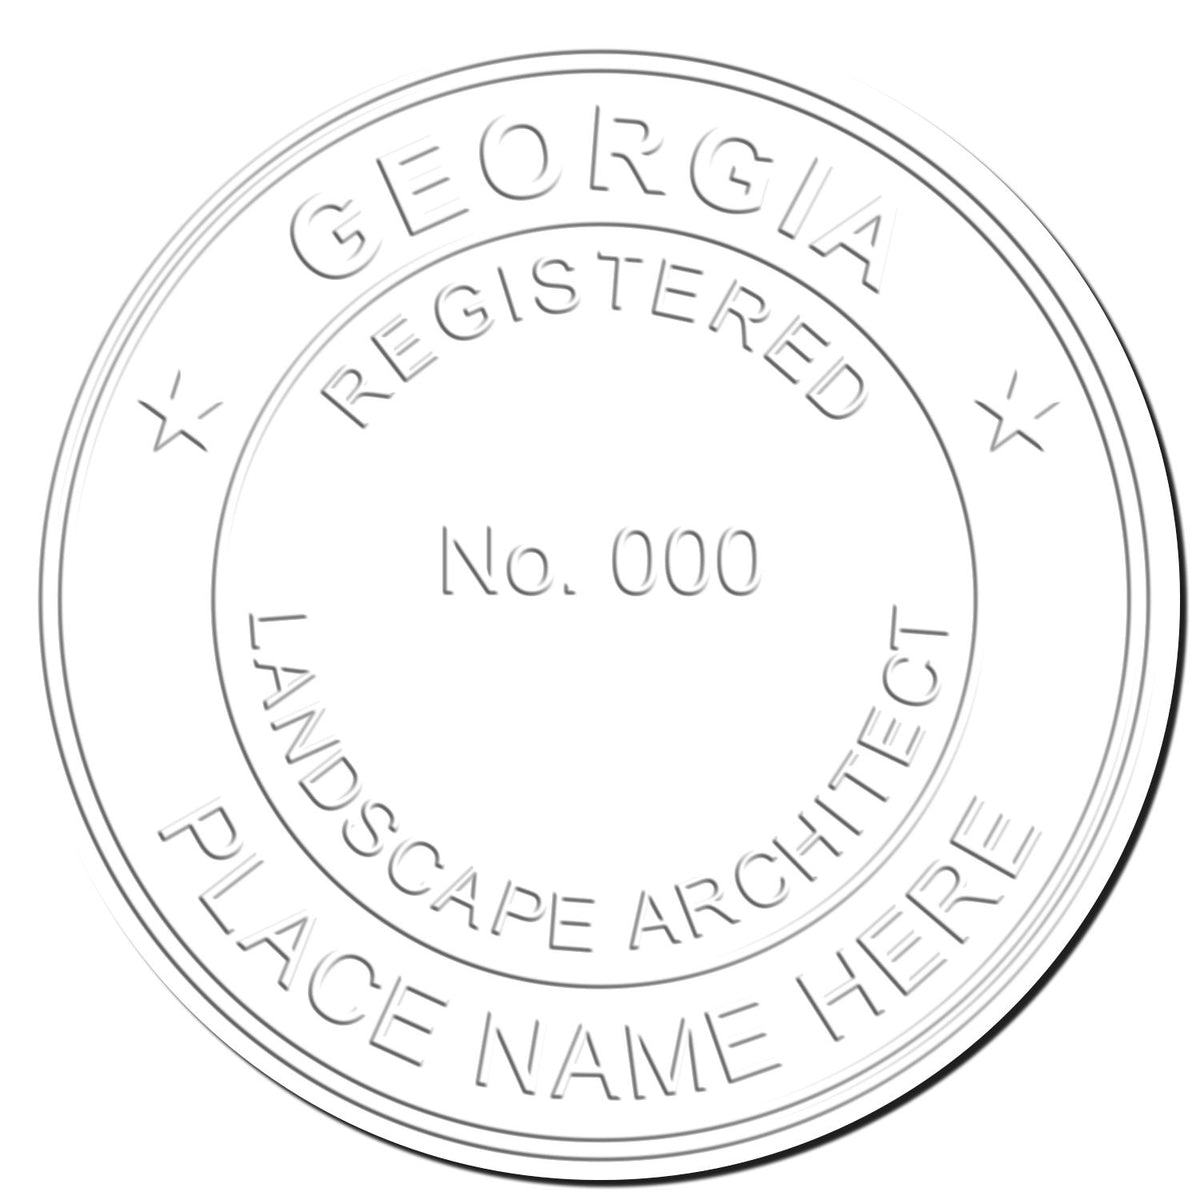 This paper is stamped with a sample imprint of the Hybrid Georgia Landscape Architect Seal, signifying its quality and reliability.